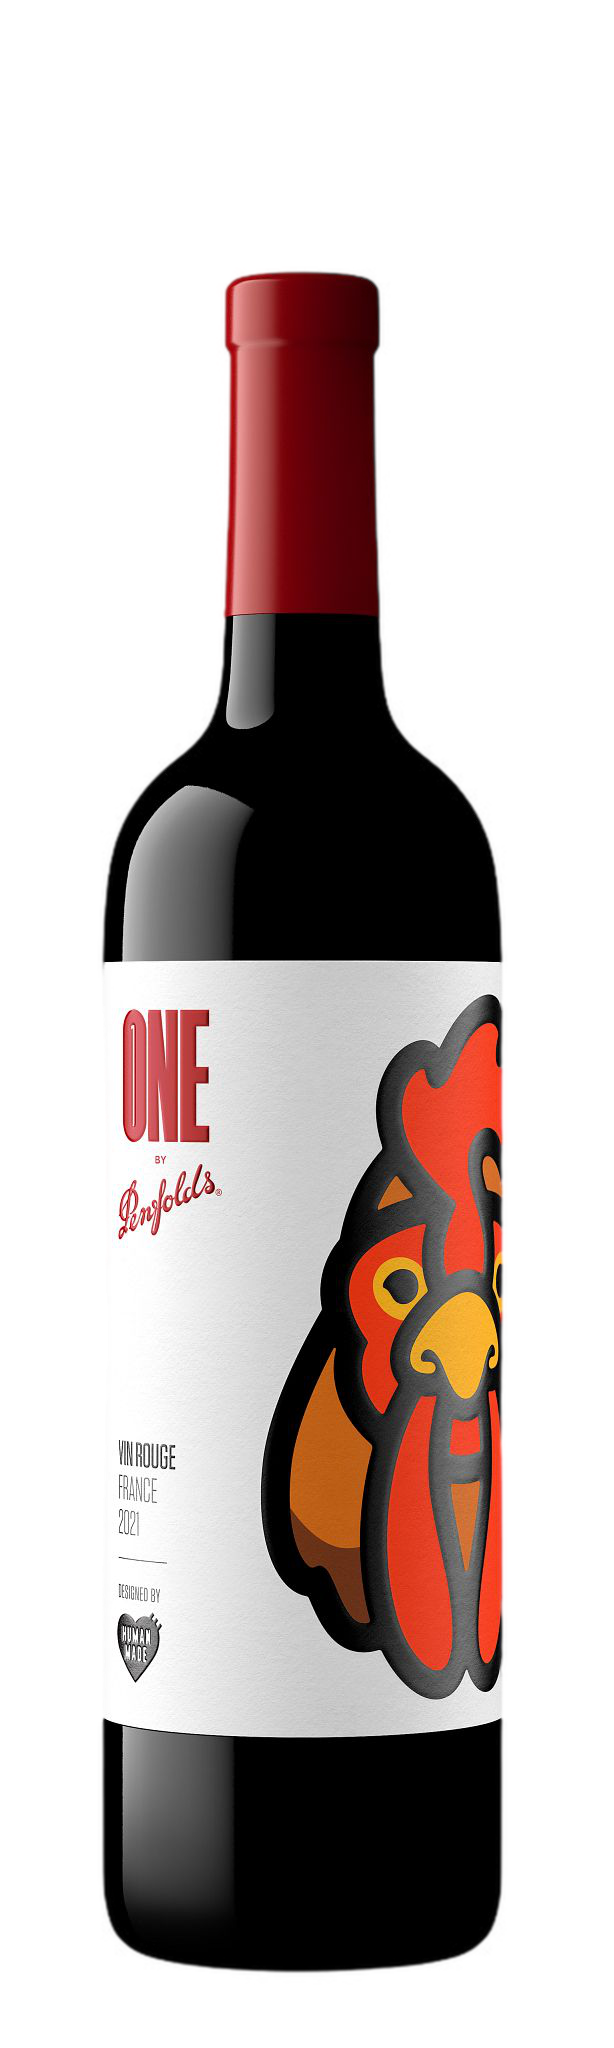 One by Penfolds Vin Rouge France 2021